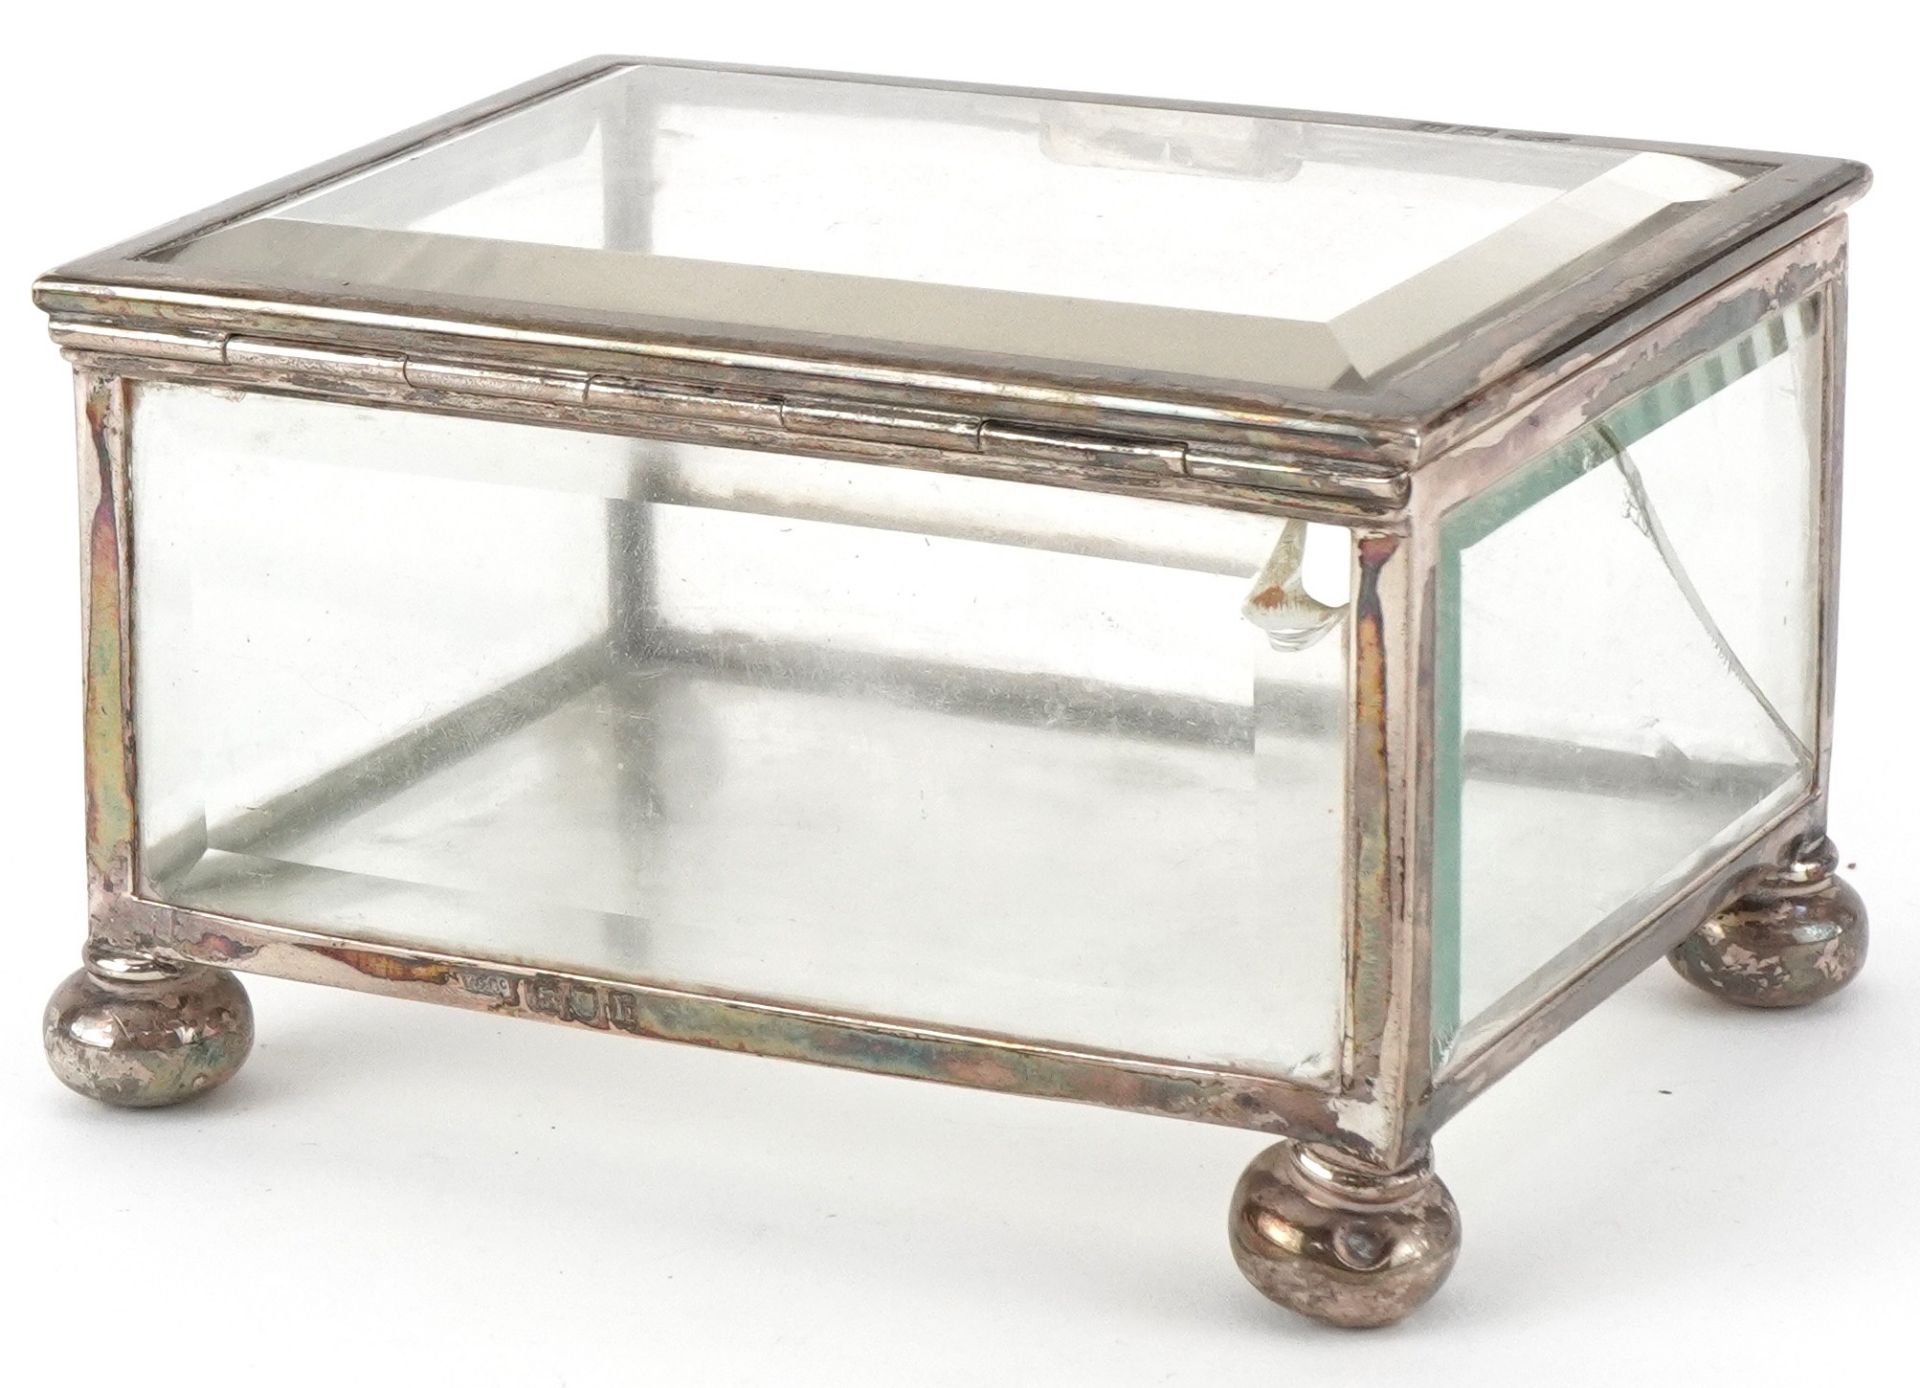 Grey & Co, Edwardian silver and bevelled glass jewel box raised on four bun feet, London 1903, 7cm H - Image 4 of 6